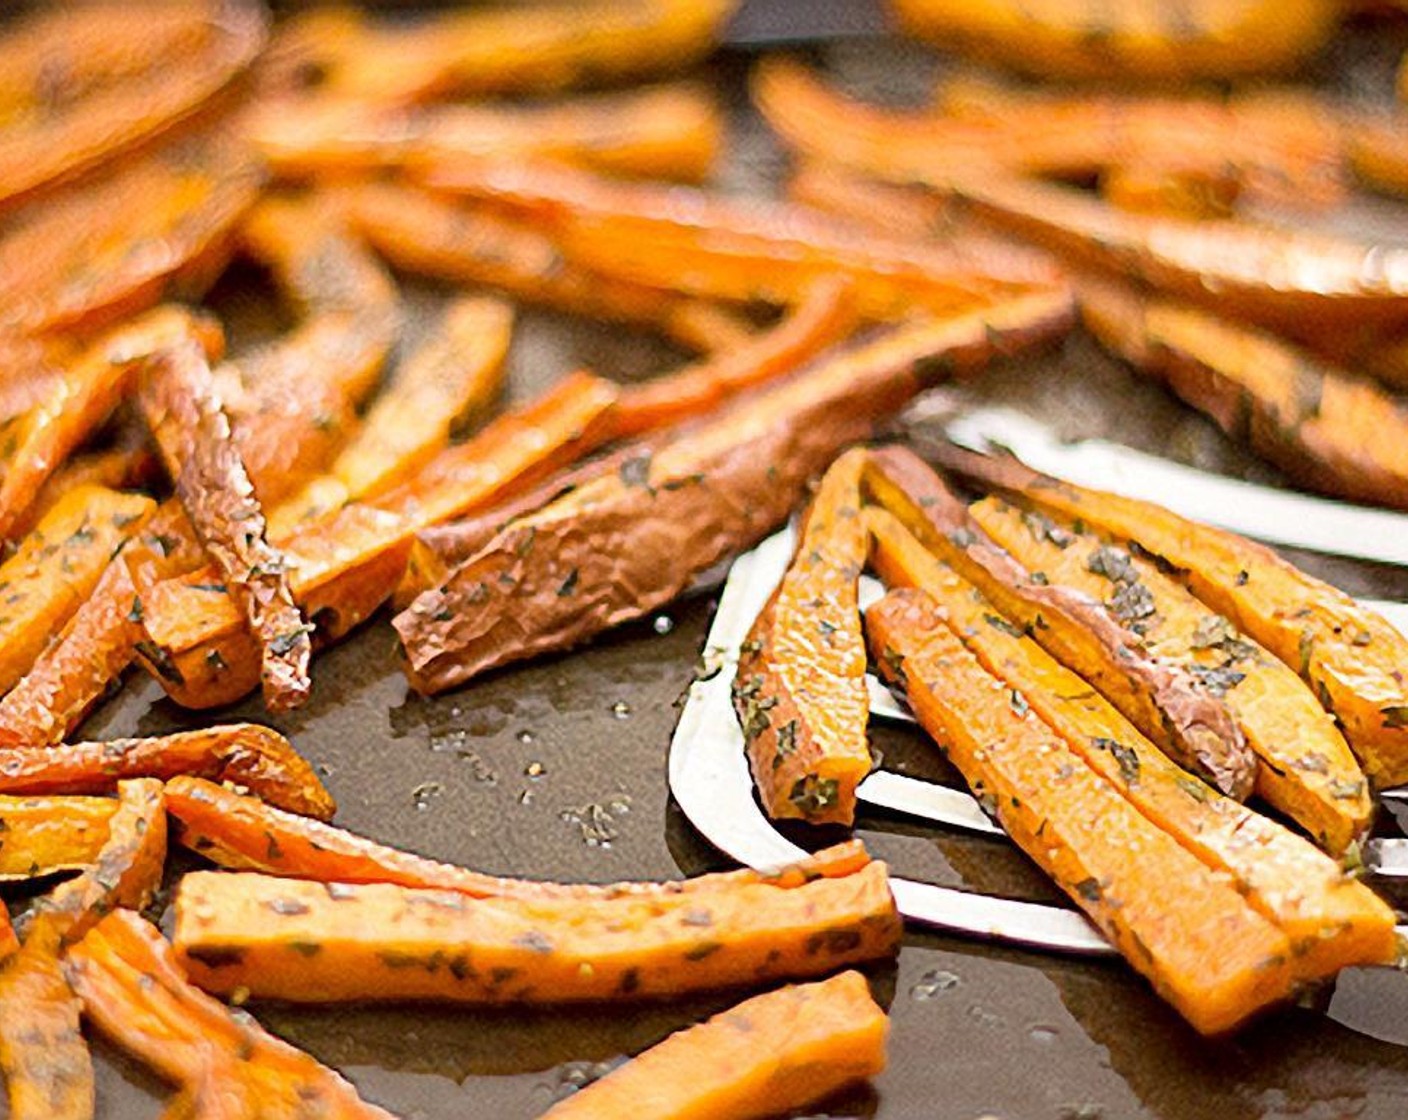 step 4 Arrange in a single layer and make sure to flip the fries over two or three times to brown evenly. Bake for about 35-40 minutes, or until golden brown and crisp. Keep an eye on them making sure not to burn.